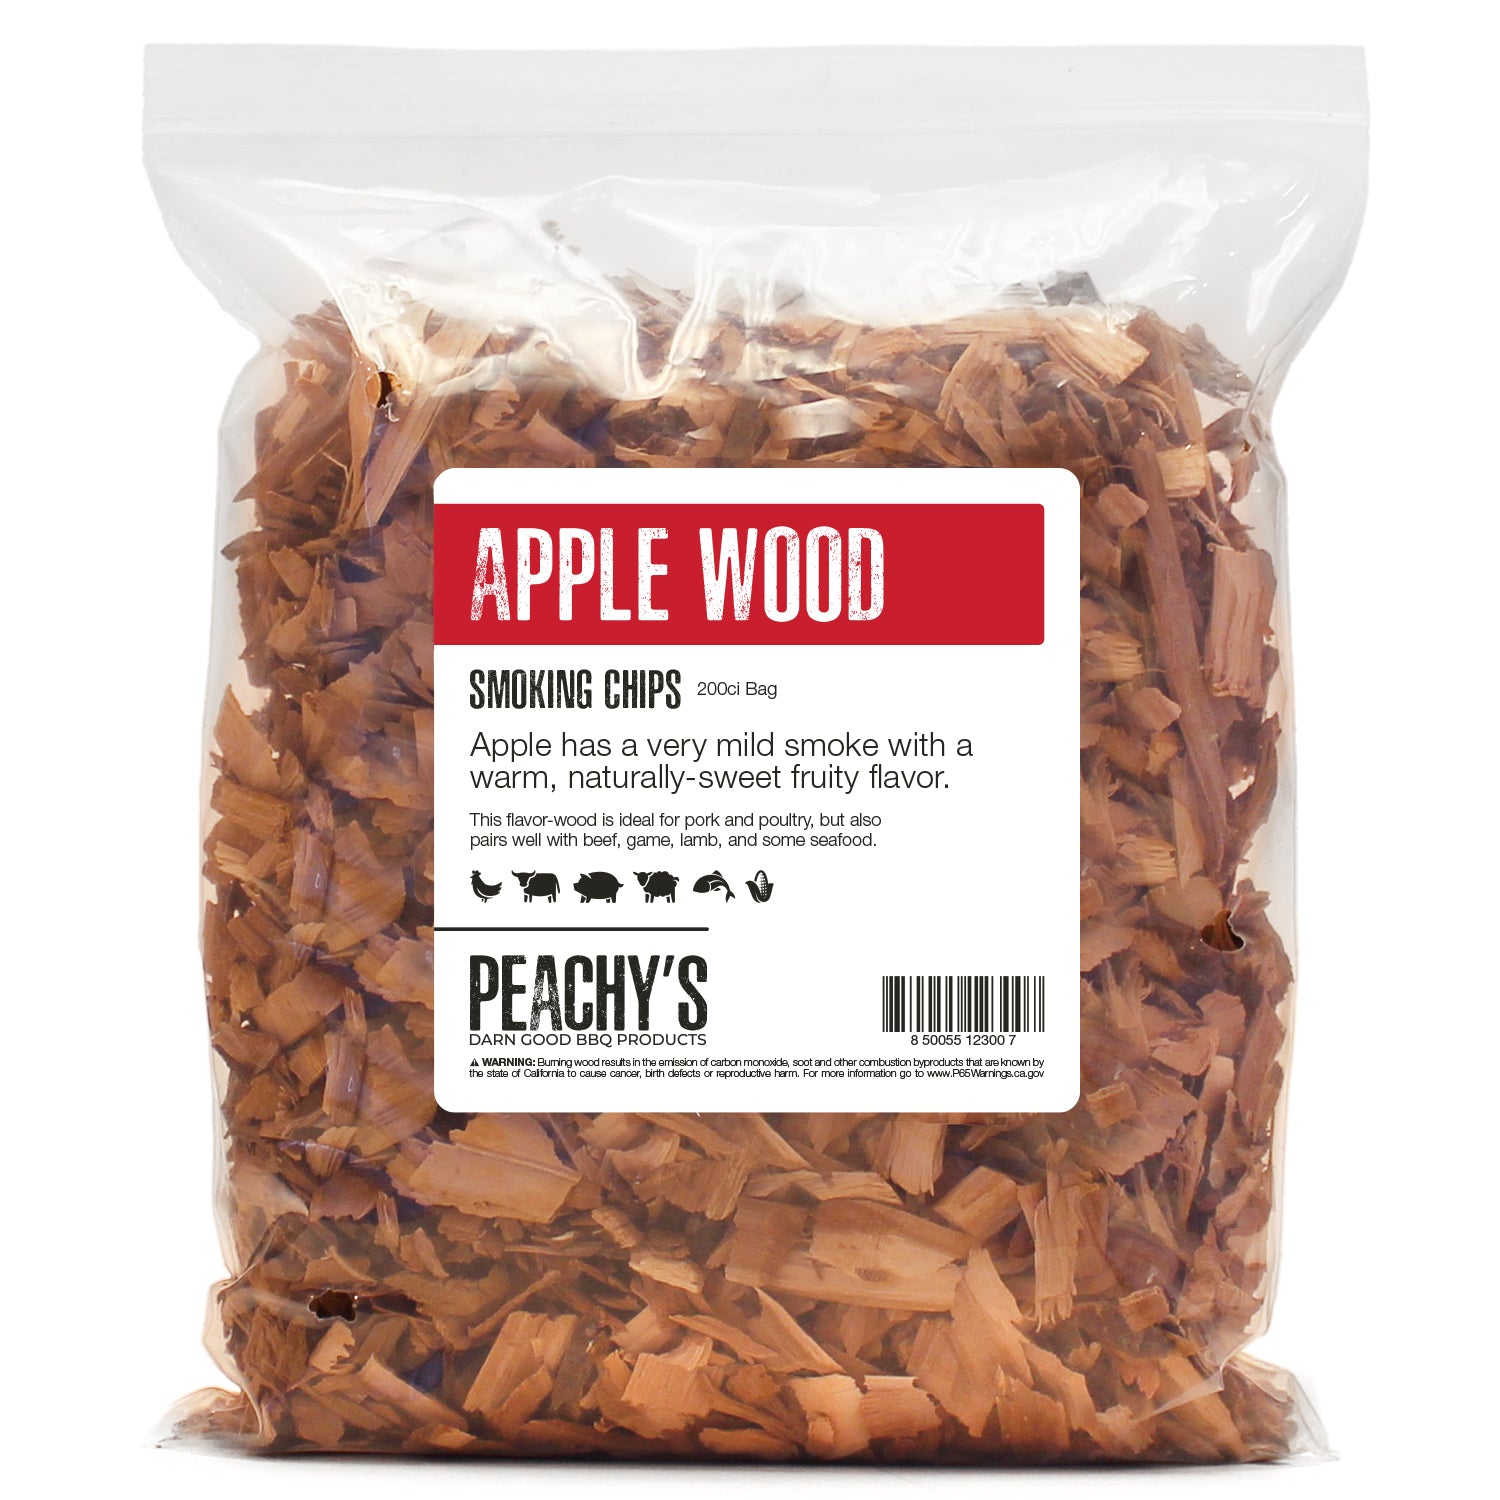 APPLE Chips | 200ci Bag of Premium Smoking Woods by PEACHY'S